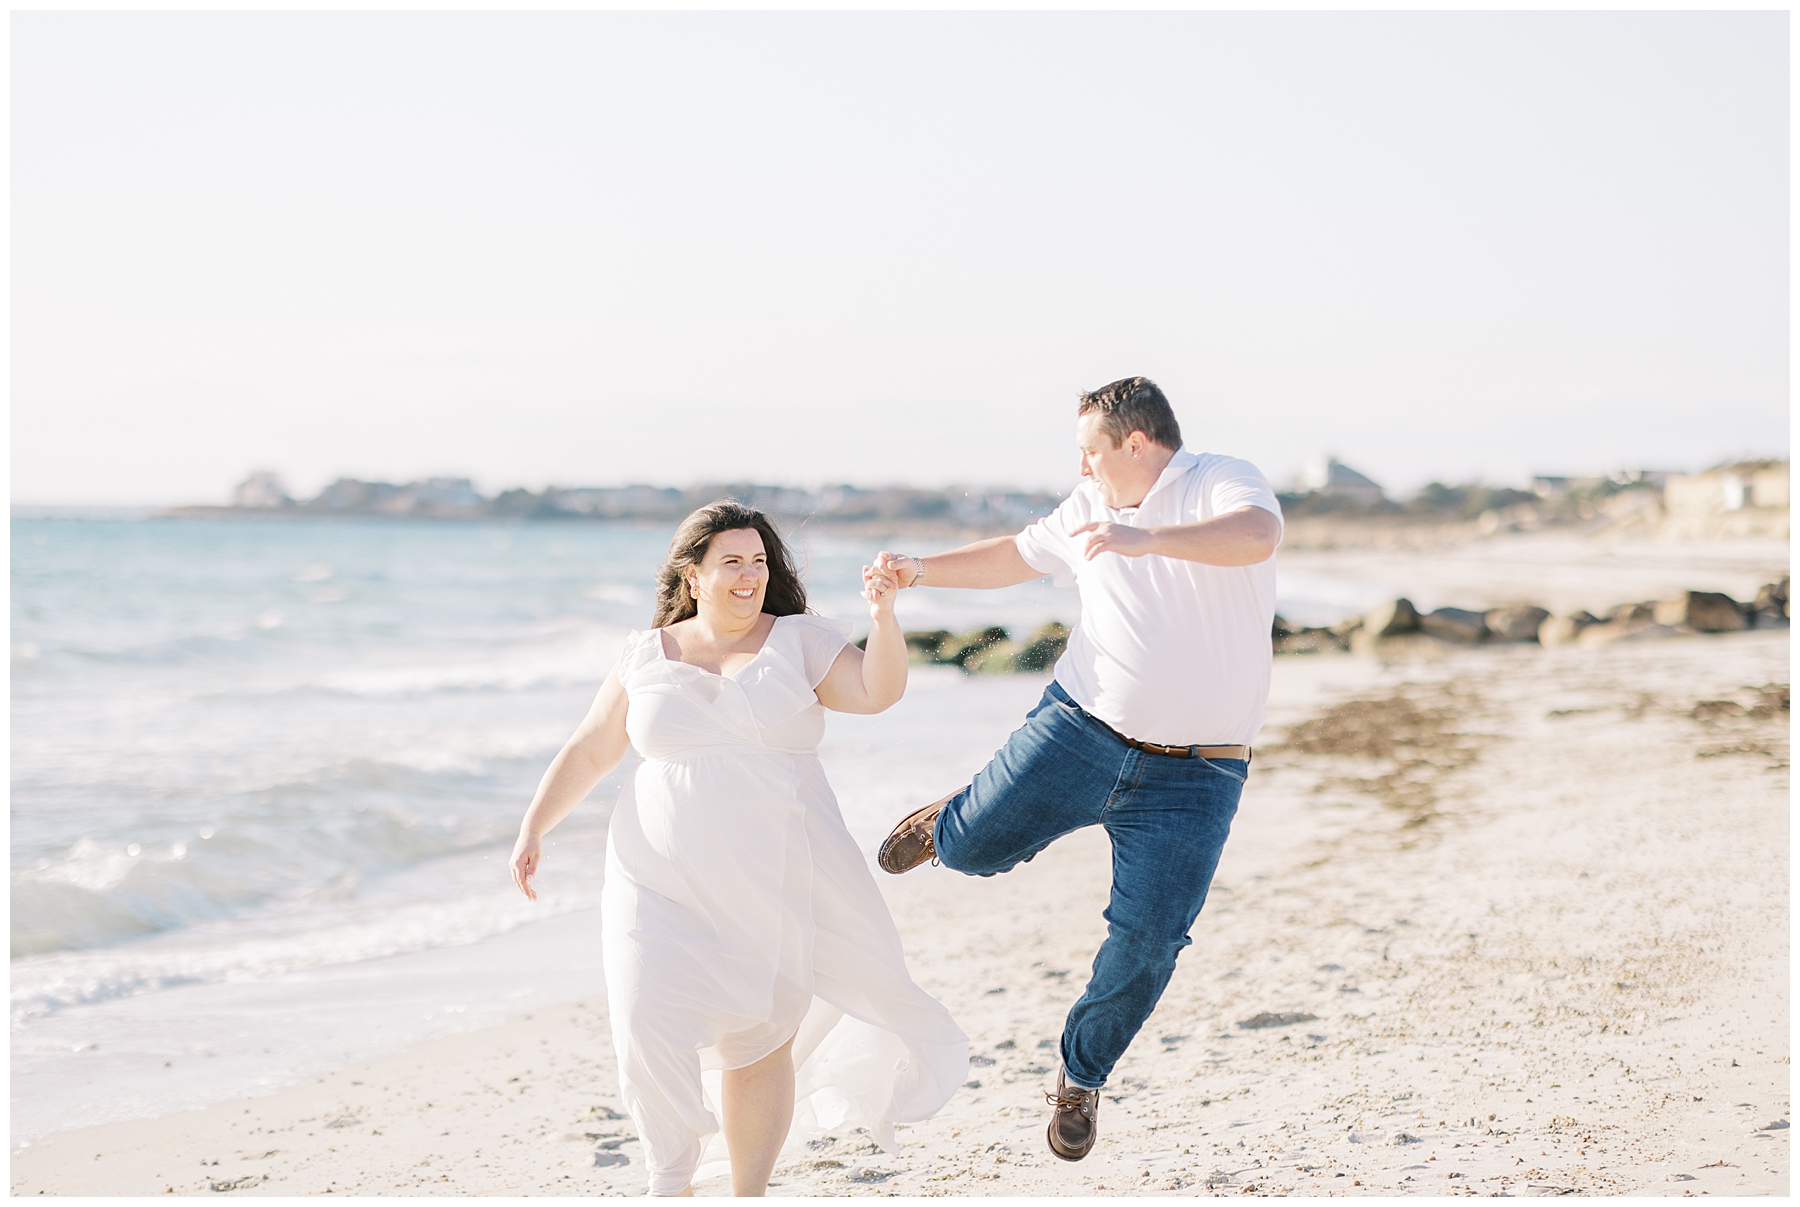 candid photo of couple on the beach having fun during engagement photos
